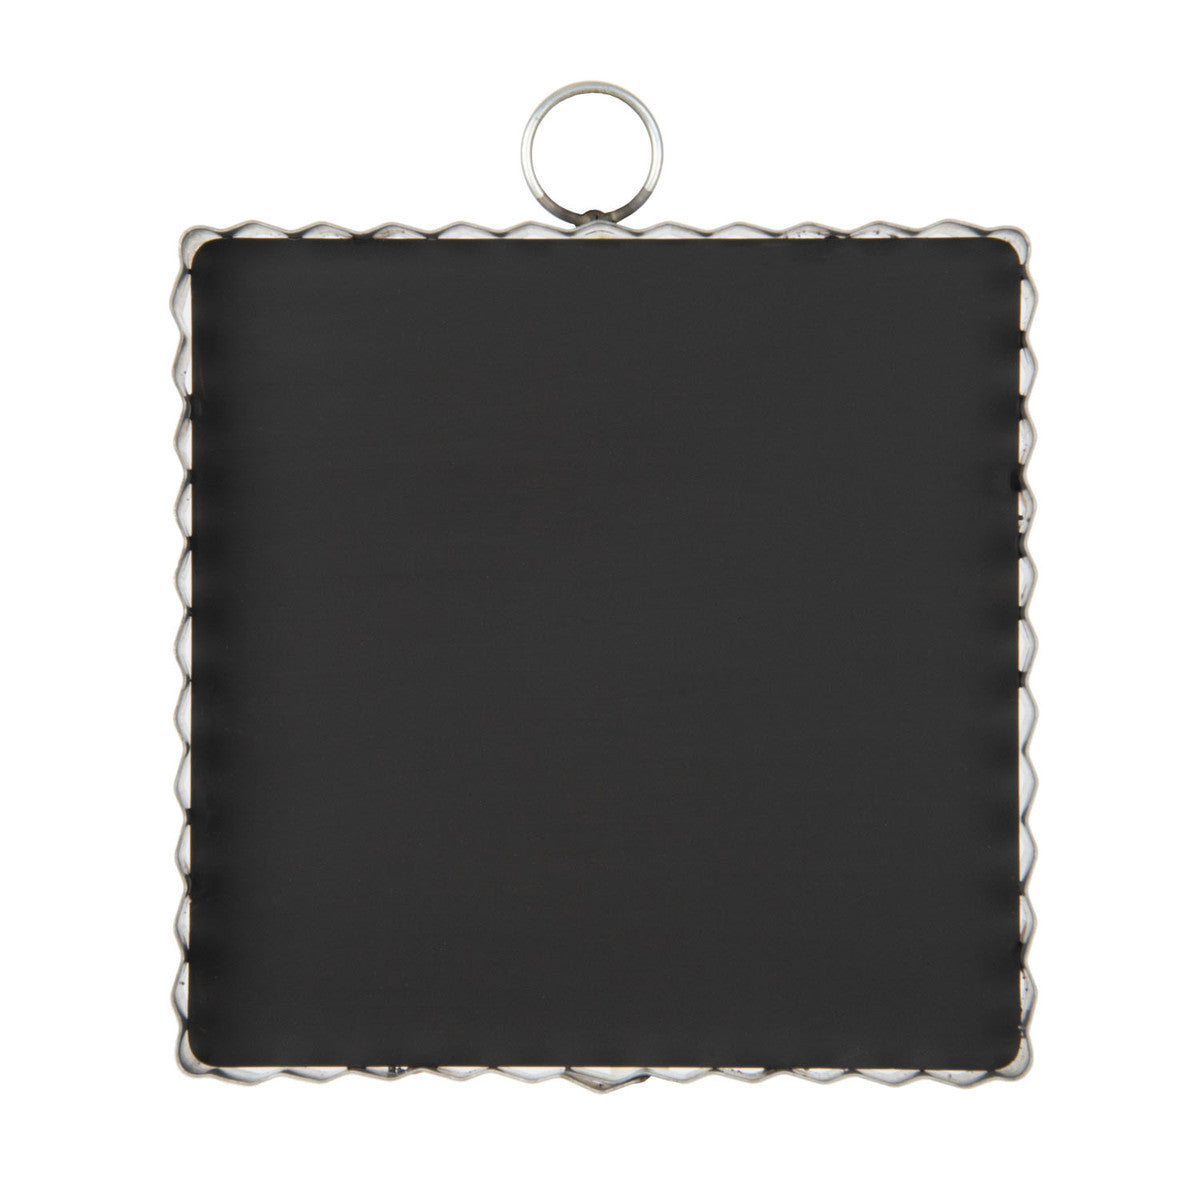 Incorporate this chalkboard display wall art into your décor or for household use. It's the same metal design and size all all of our beautiful display wall art, but it's a chalkboard!  How fun to use as reminders or a favorite saying - to use in your home as you choose. Stems and bases are sold separately in a variety of sizes and colors to display your print.   Dimension: 6" x 1" x 6" Materials: Metal  Chalk is not included